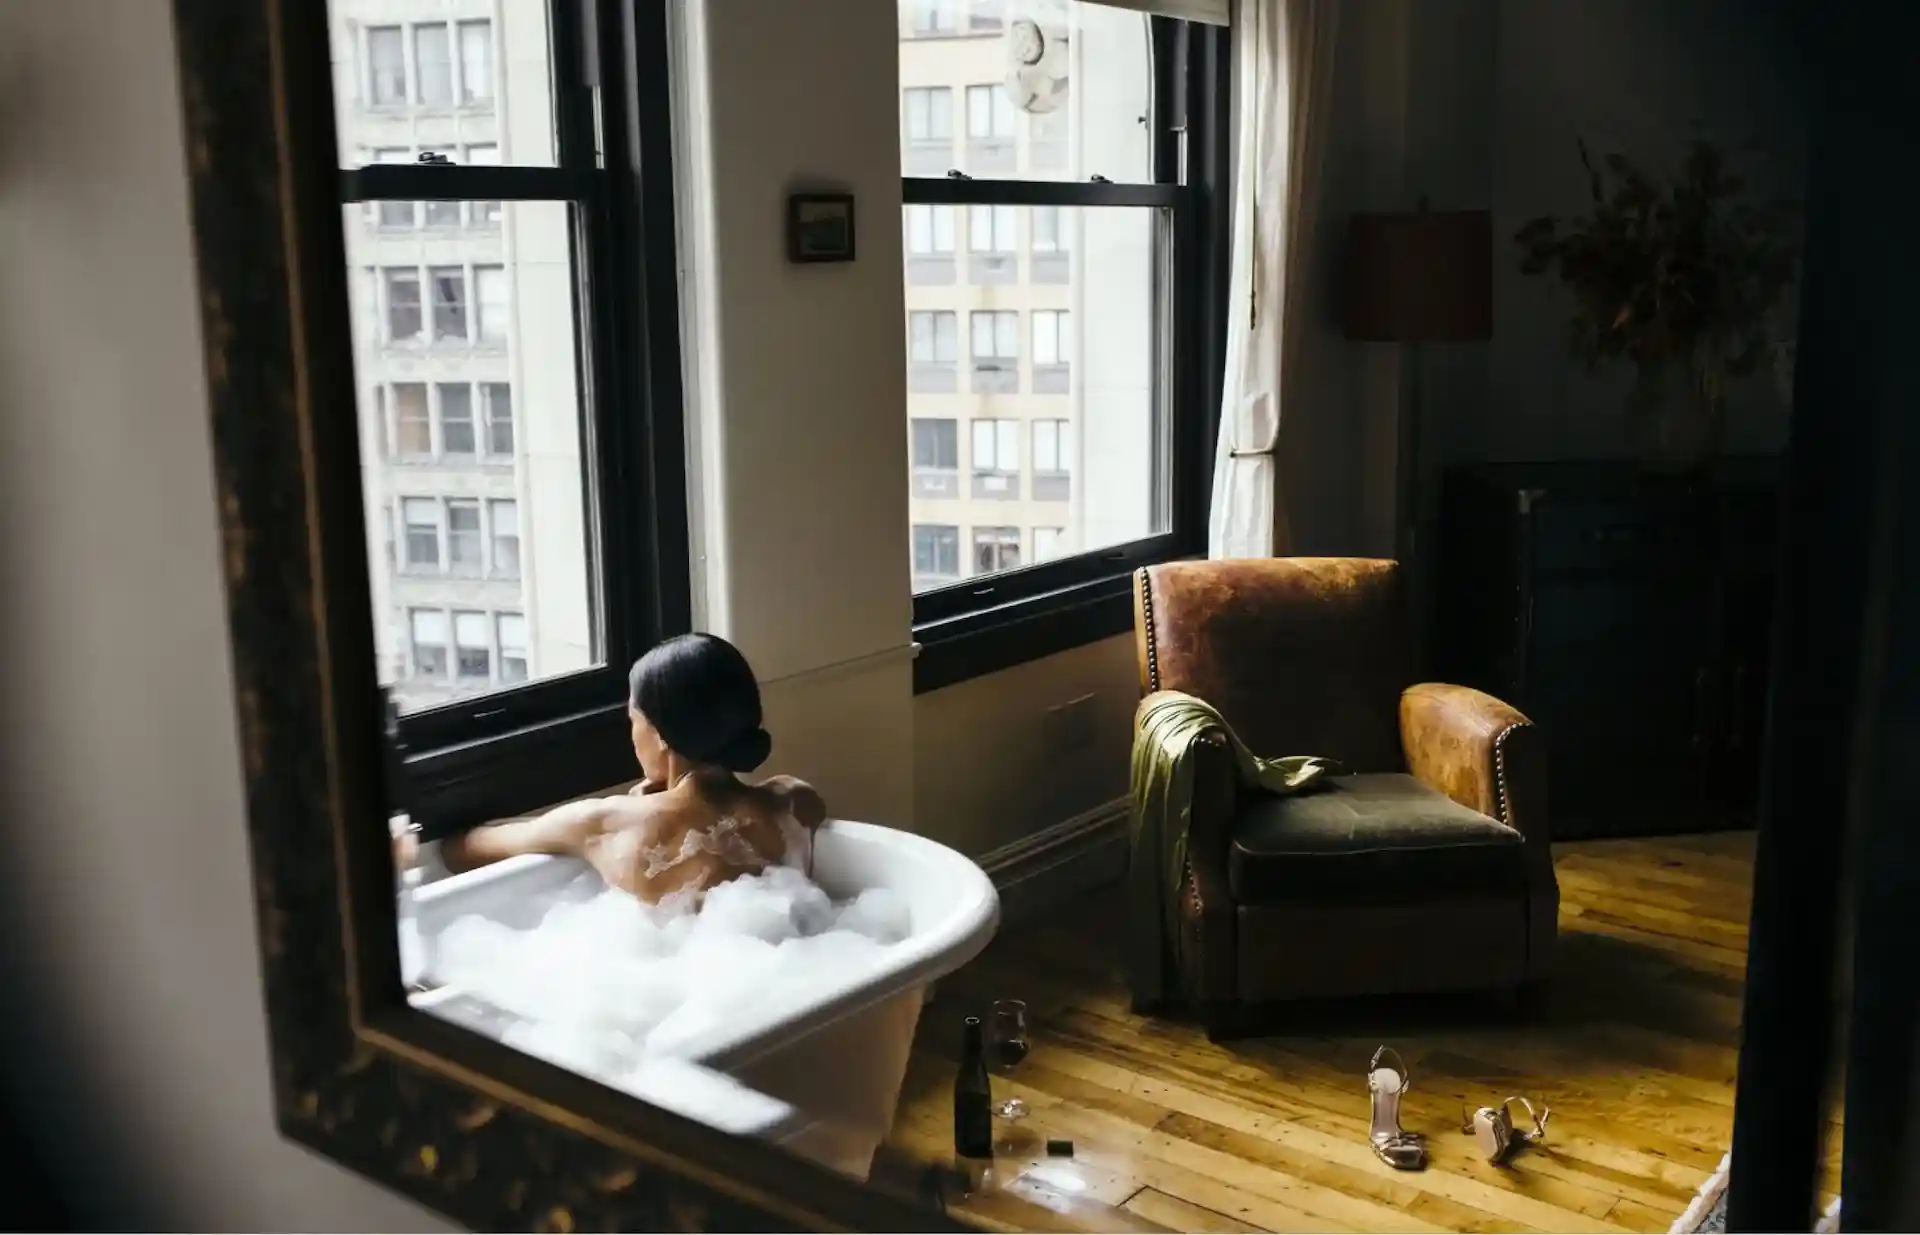 Mirror reflects a woman with her back facing the viewer in a bubble filled bathtub, looking out a window overlooking the city.